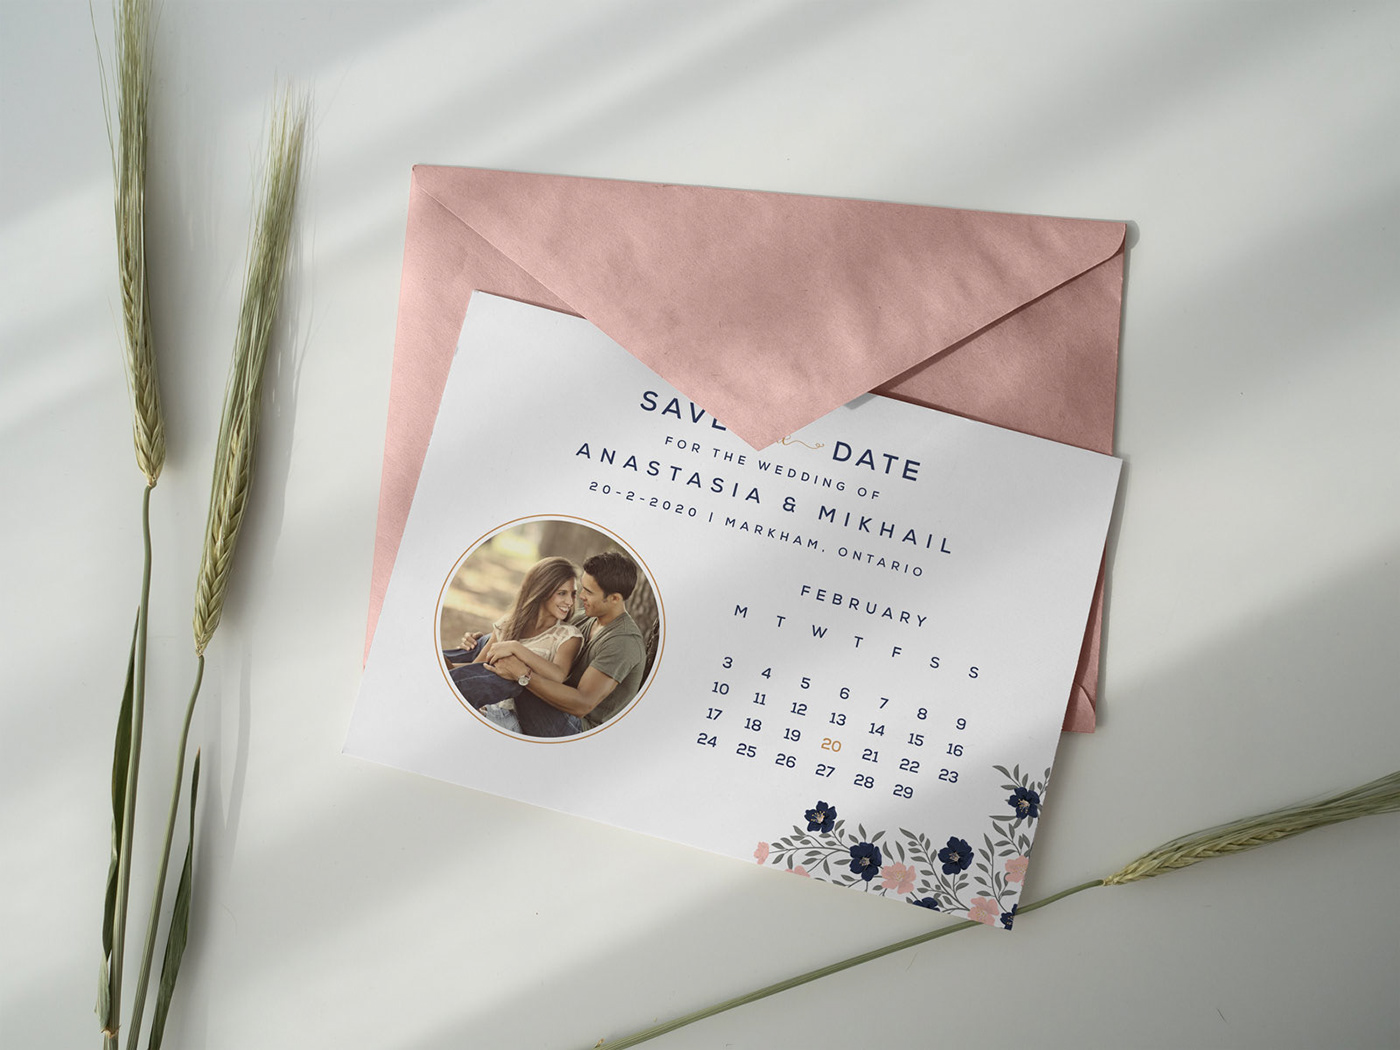 Free Save the Date Postcard Template & Envelope Mockup on Behance Regarding Free Save The Date Postcard Templates